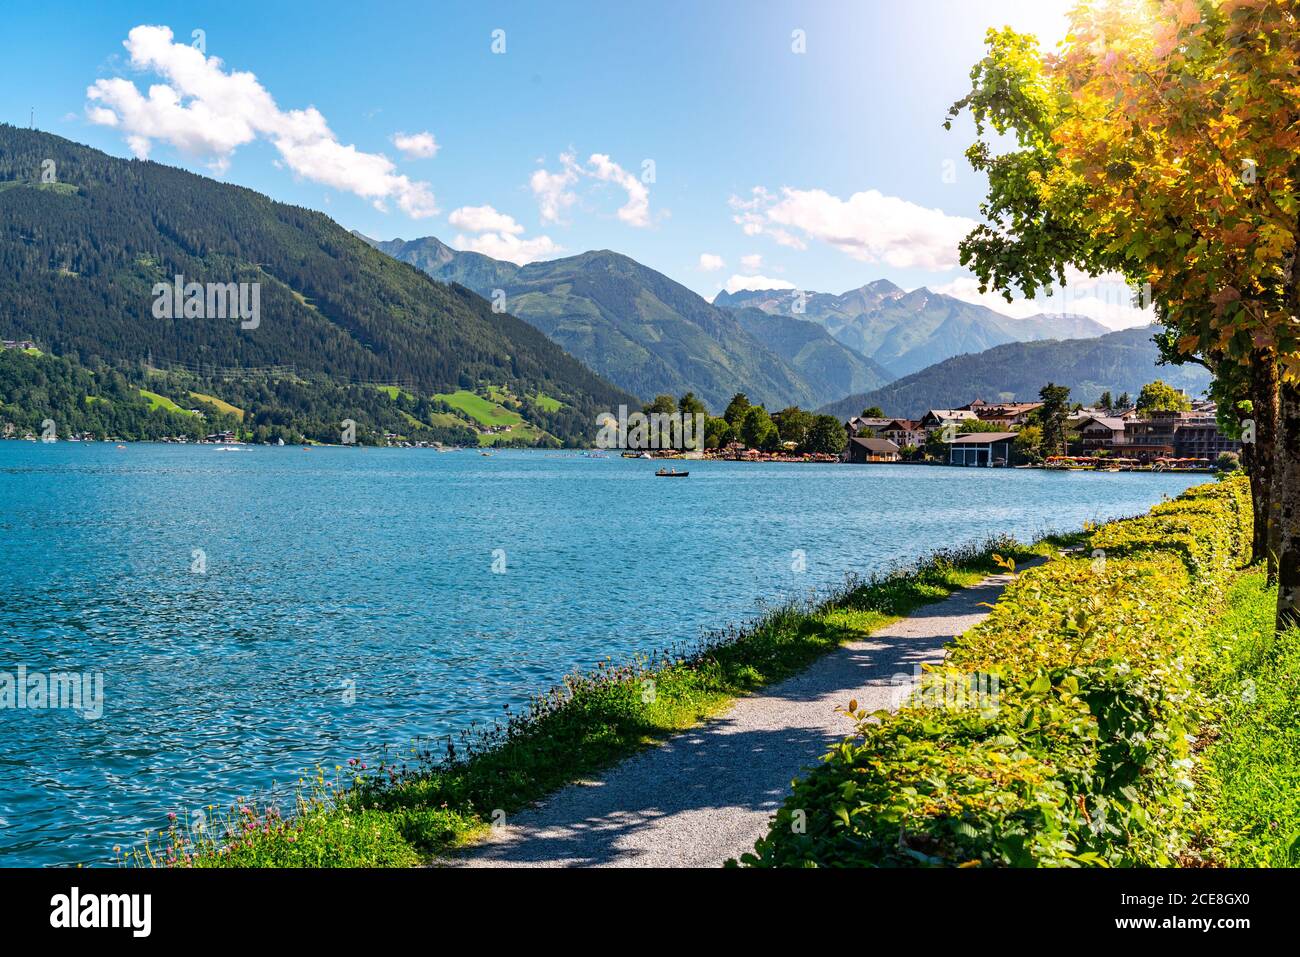 Lake Zell, German: Zeller See, and mountains on the backround. Zell am See,  Austrian Alps, Austria Stock Photo - Alamy